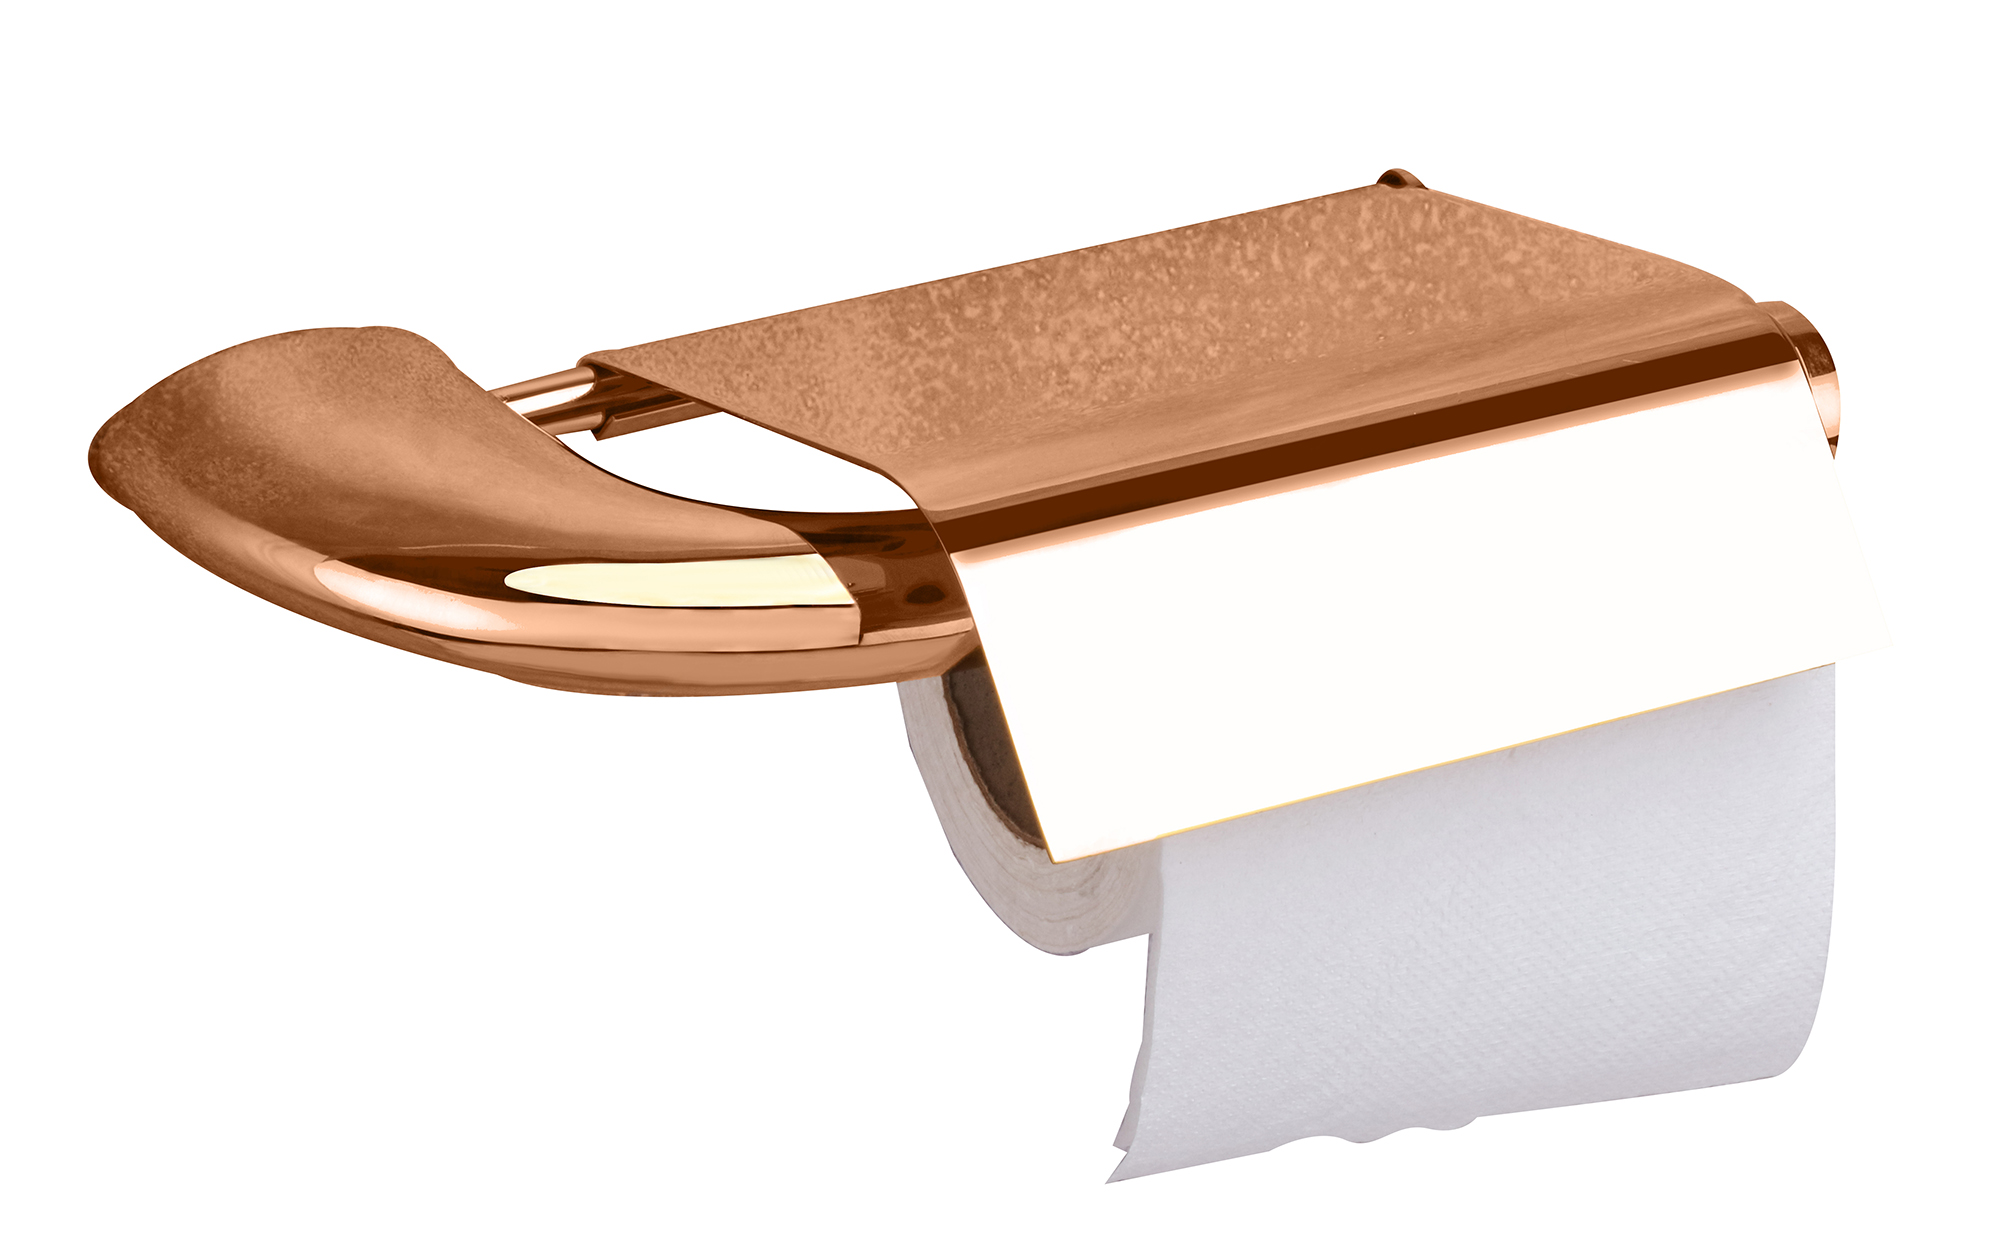 Aquieen Entice Wall Mounted Toilet Paper Holder With Flap Cover (Rose Gold)